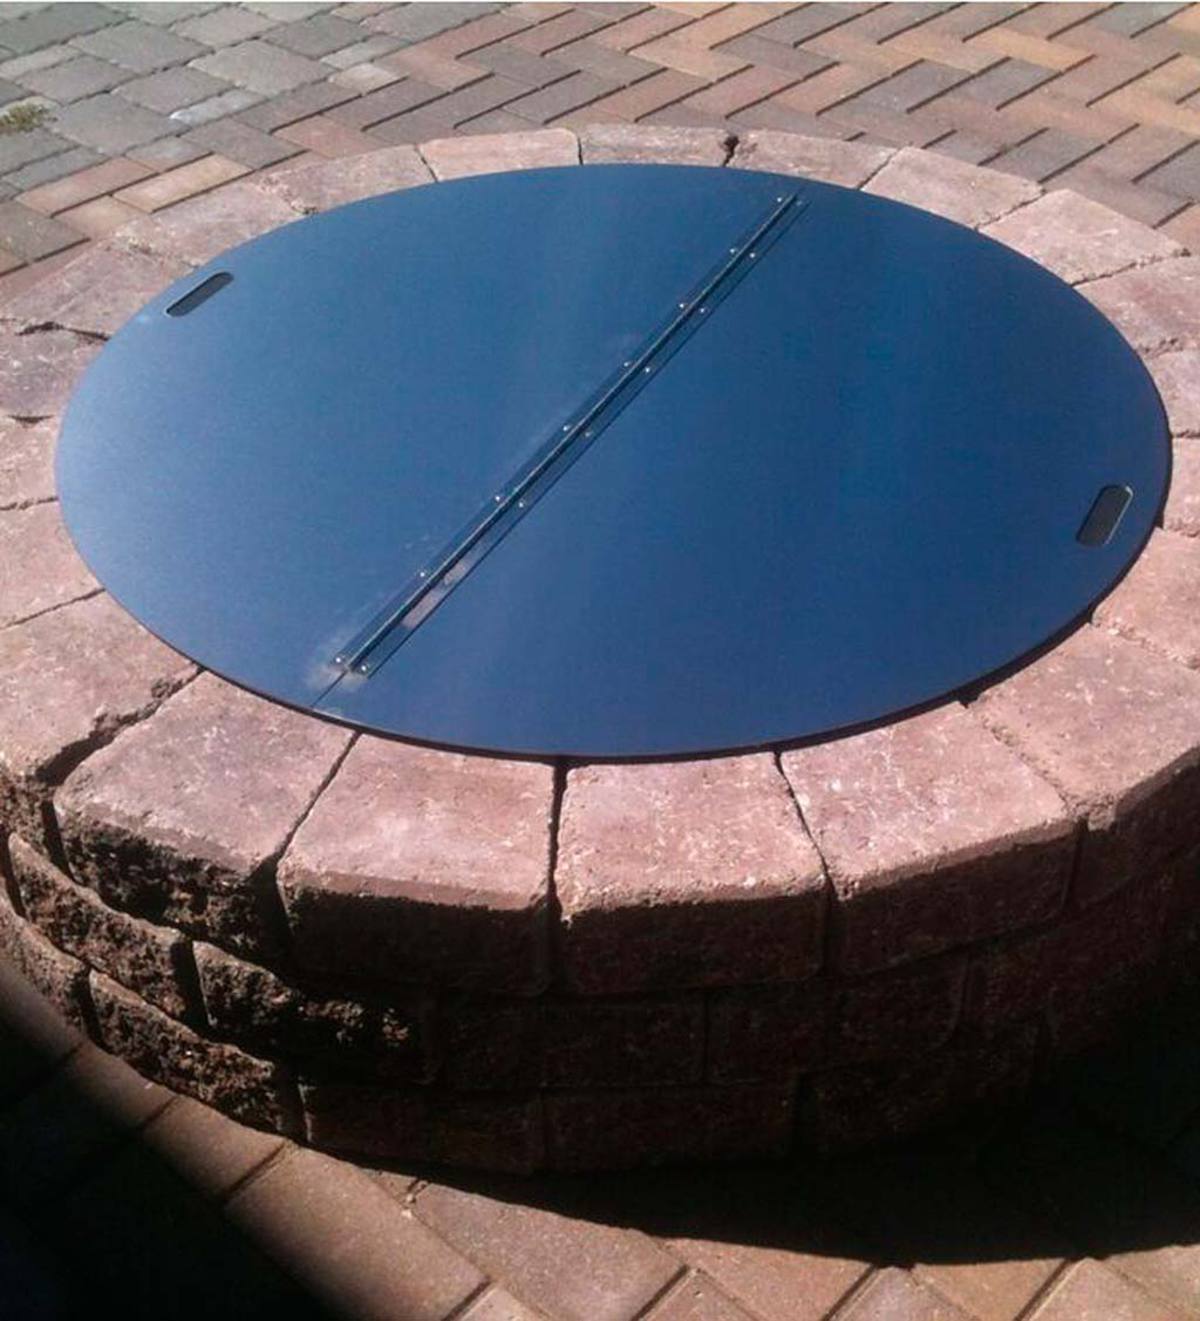 Stainless Steel Round Fire Pit Cover, Fire Pit Snuffer